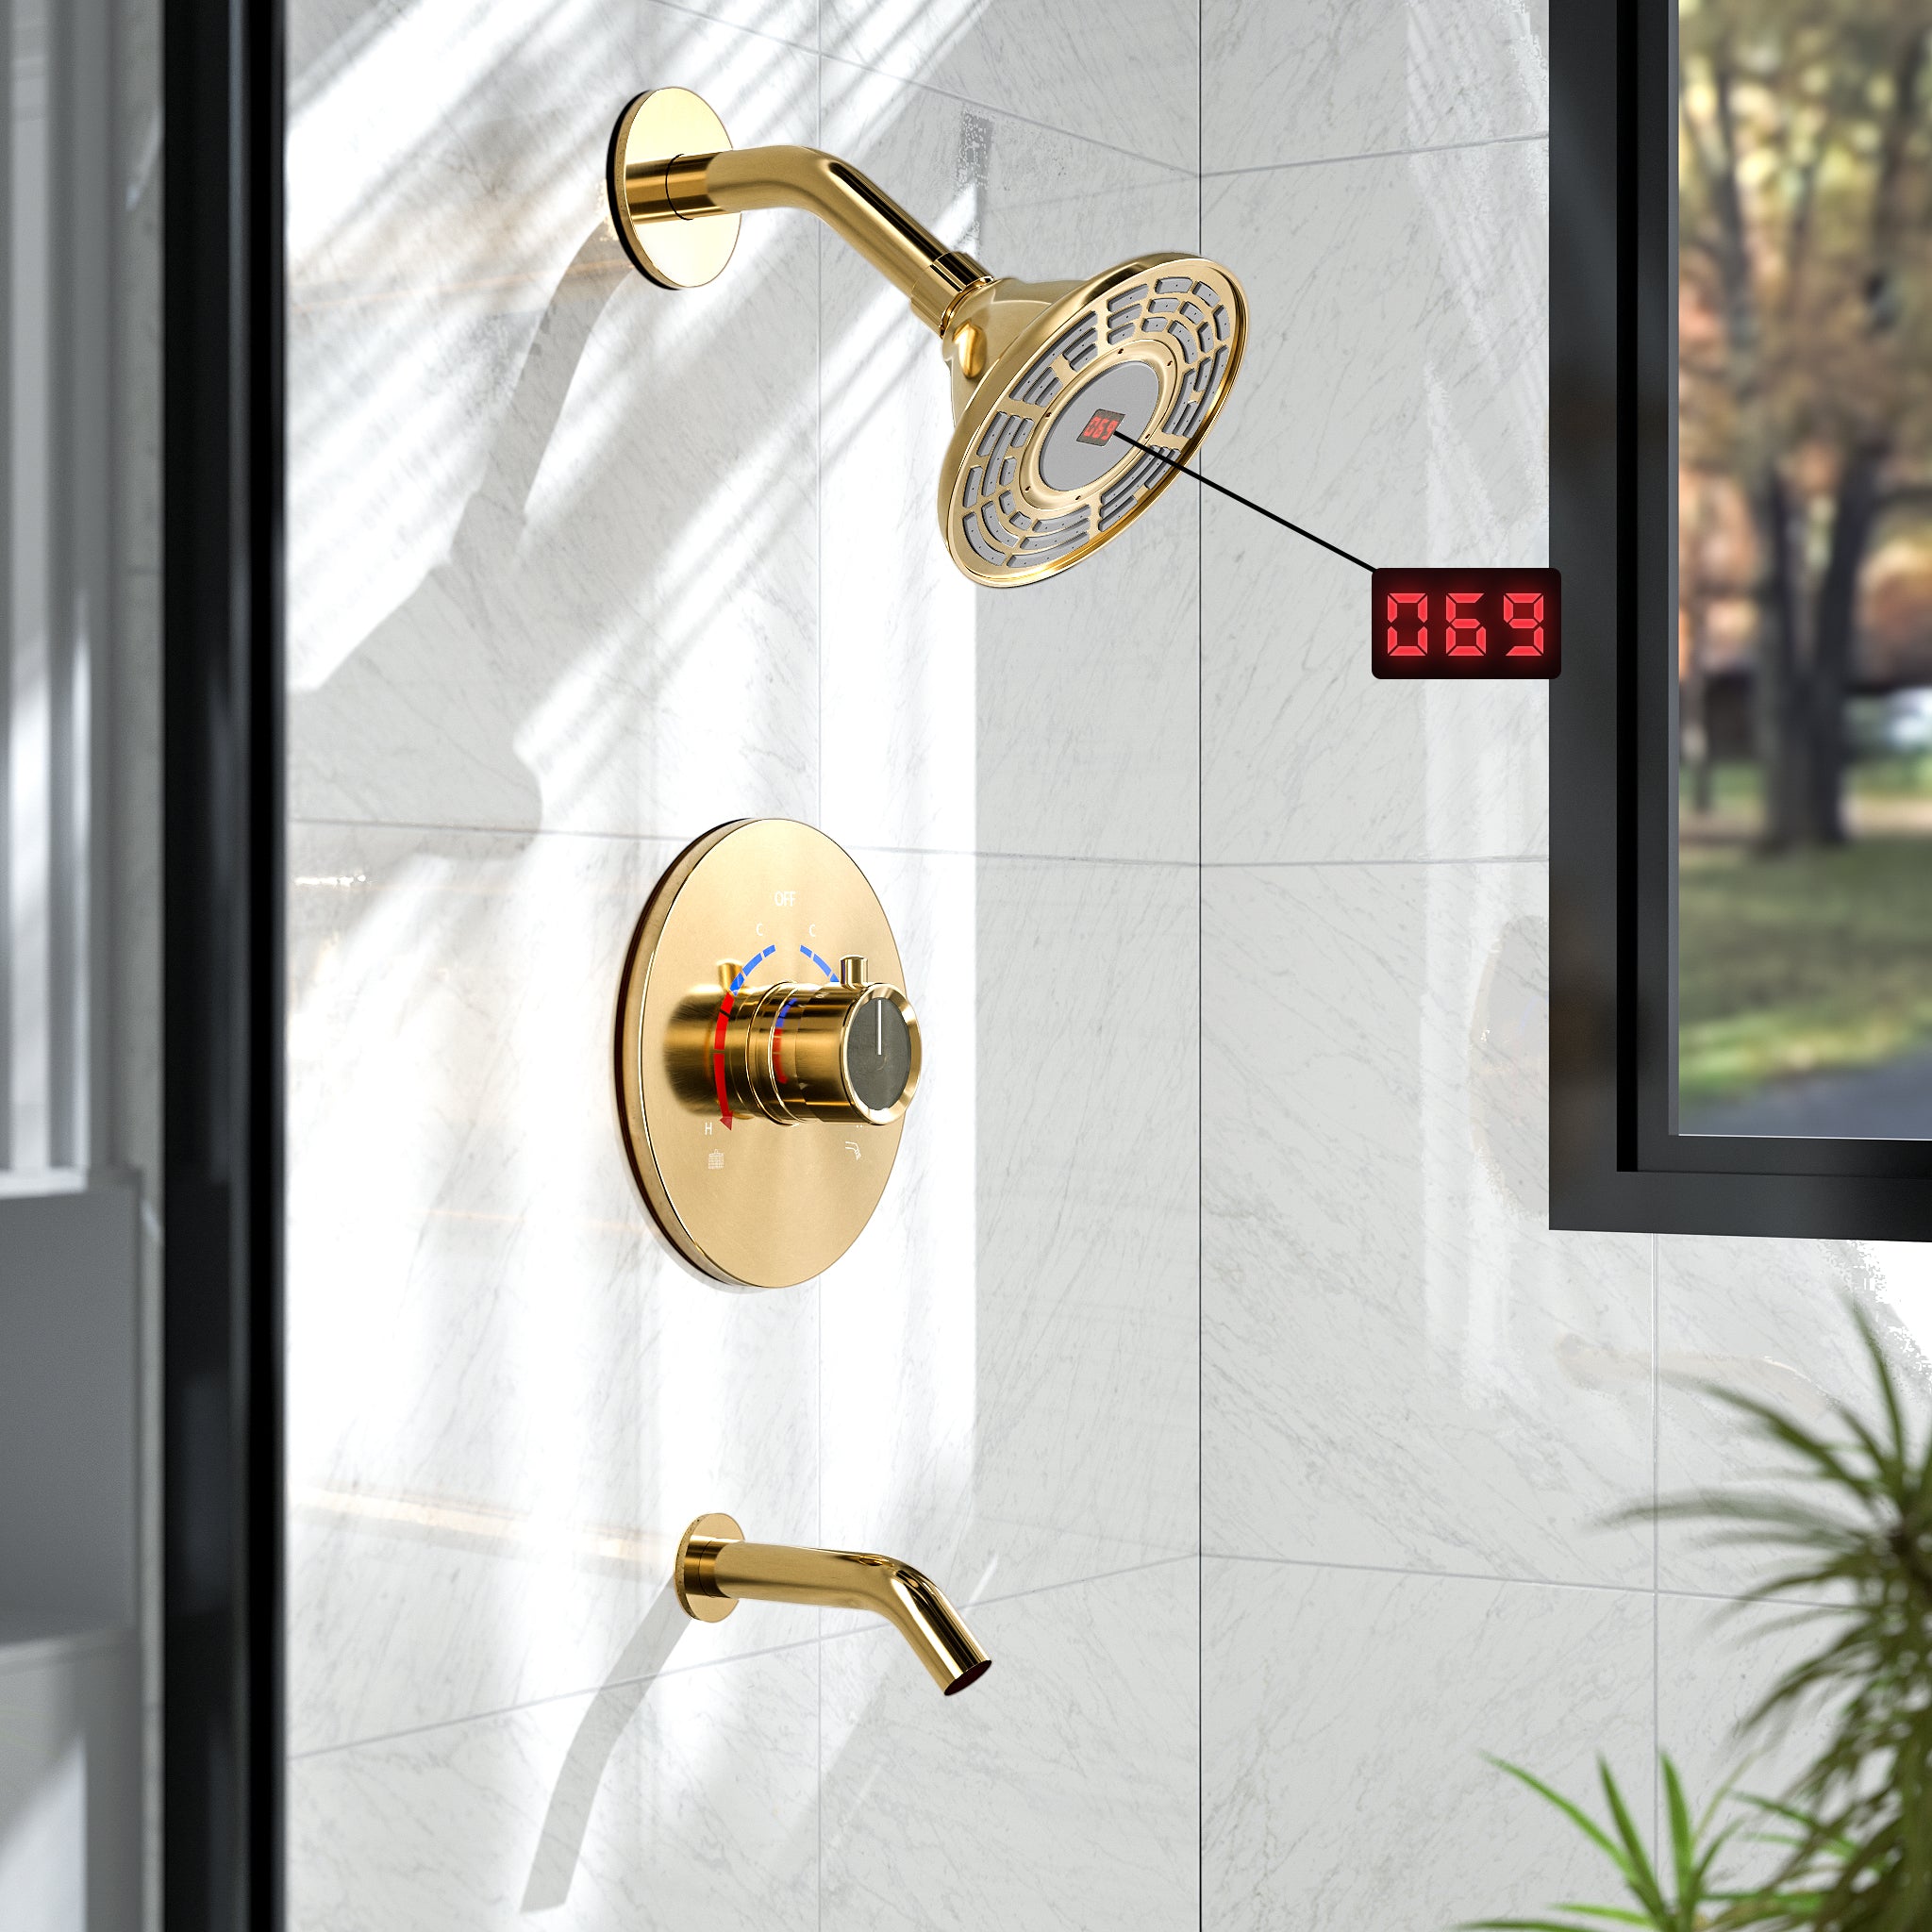 SFS-1018-GD5 EVERSTEIN Digital display constant temperature shower faucet with rough valve in Brushed Gold